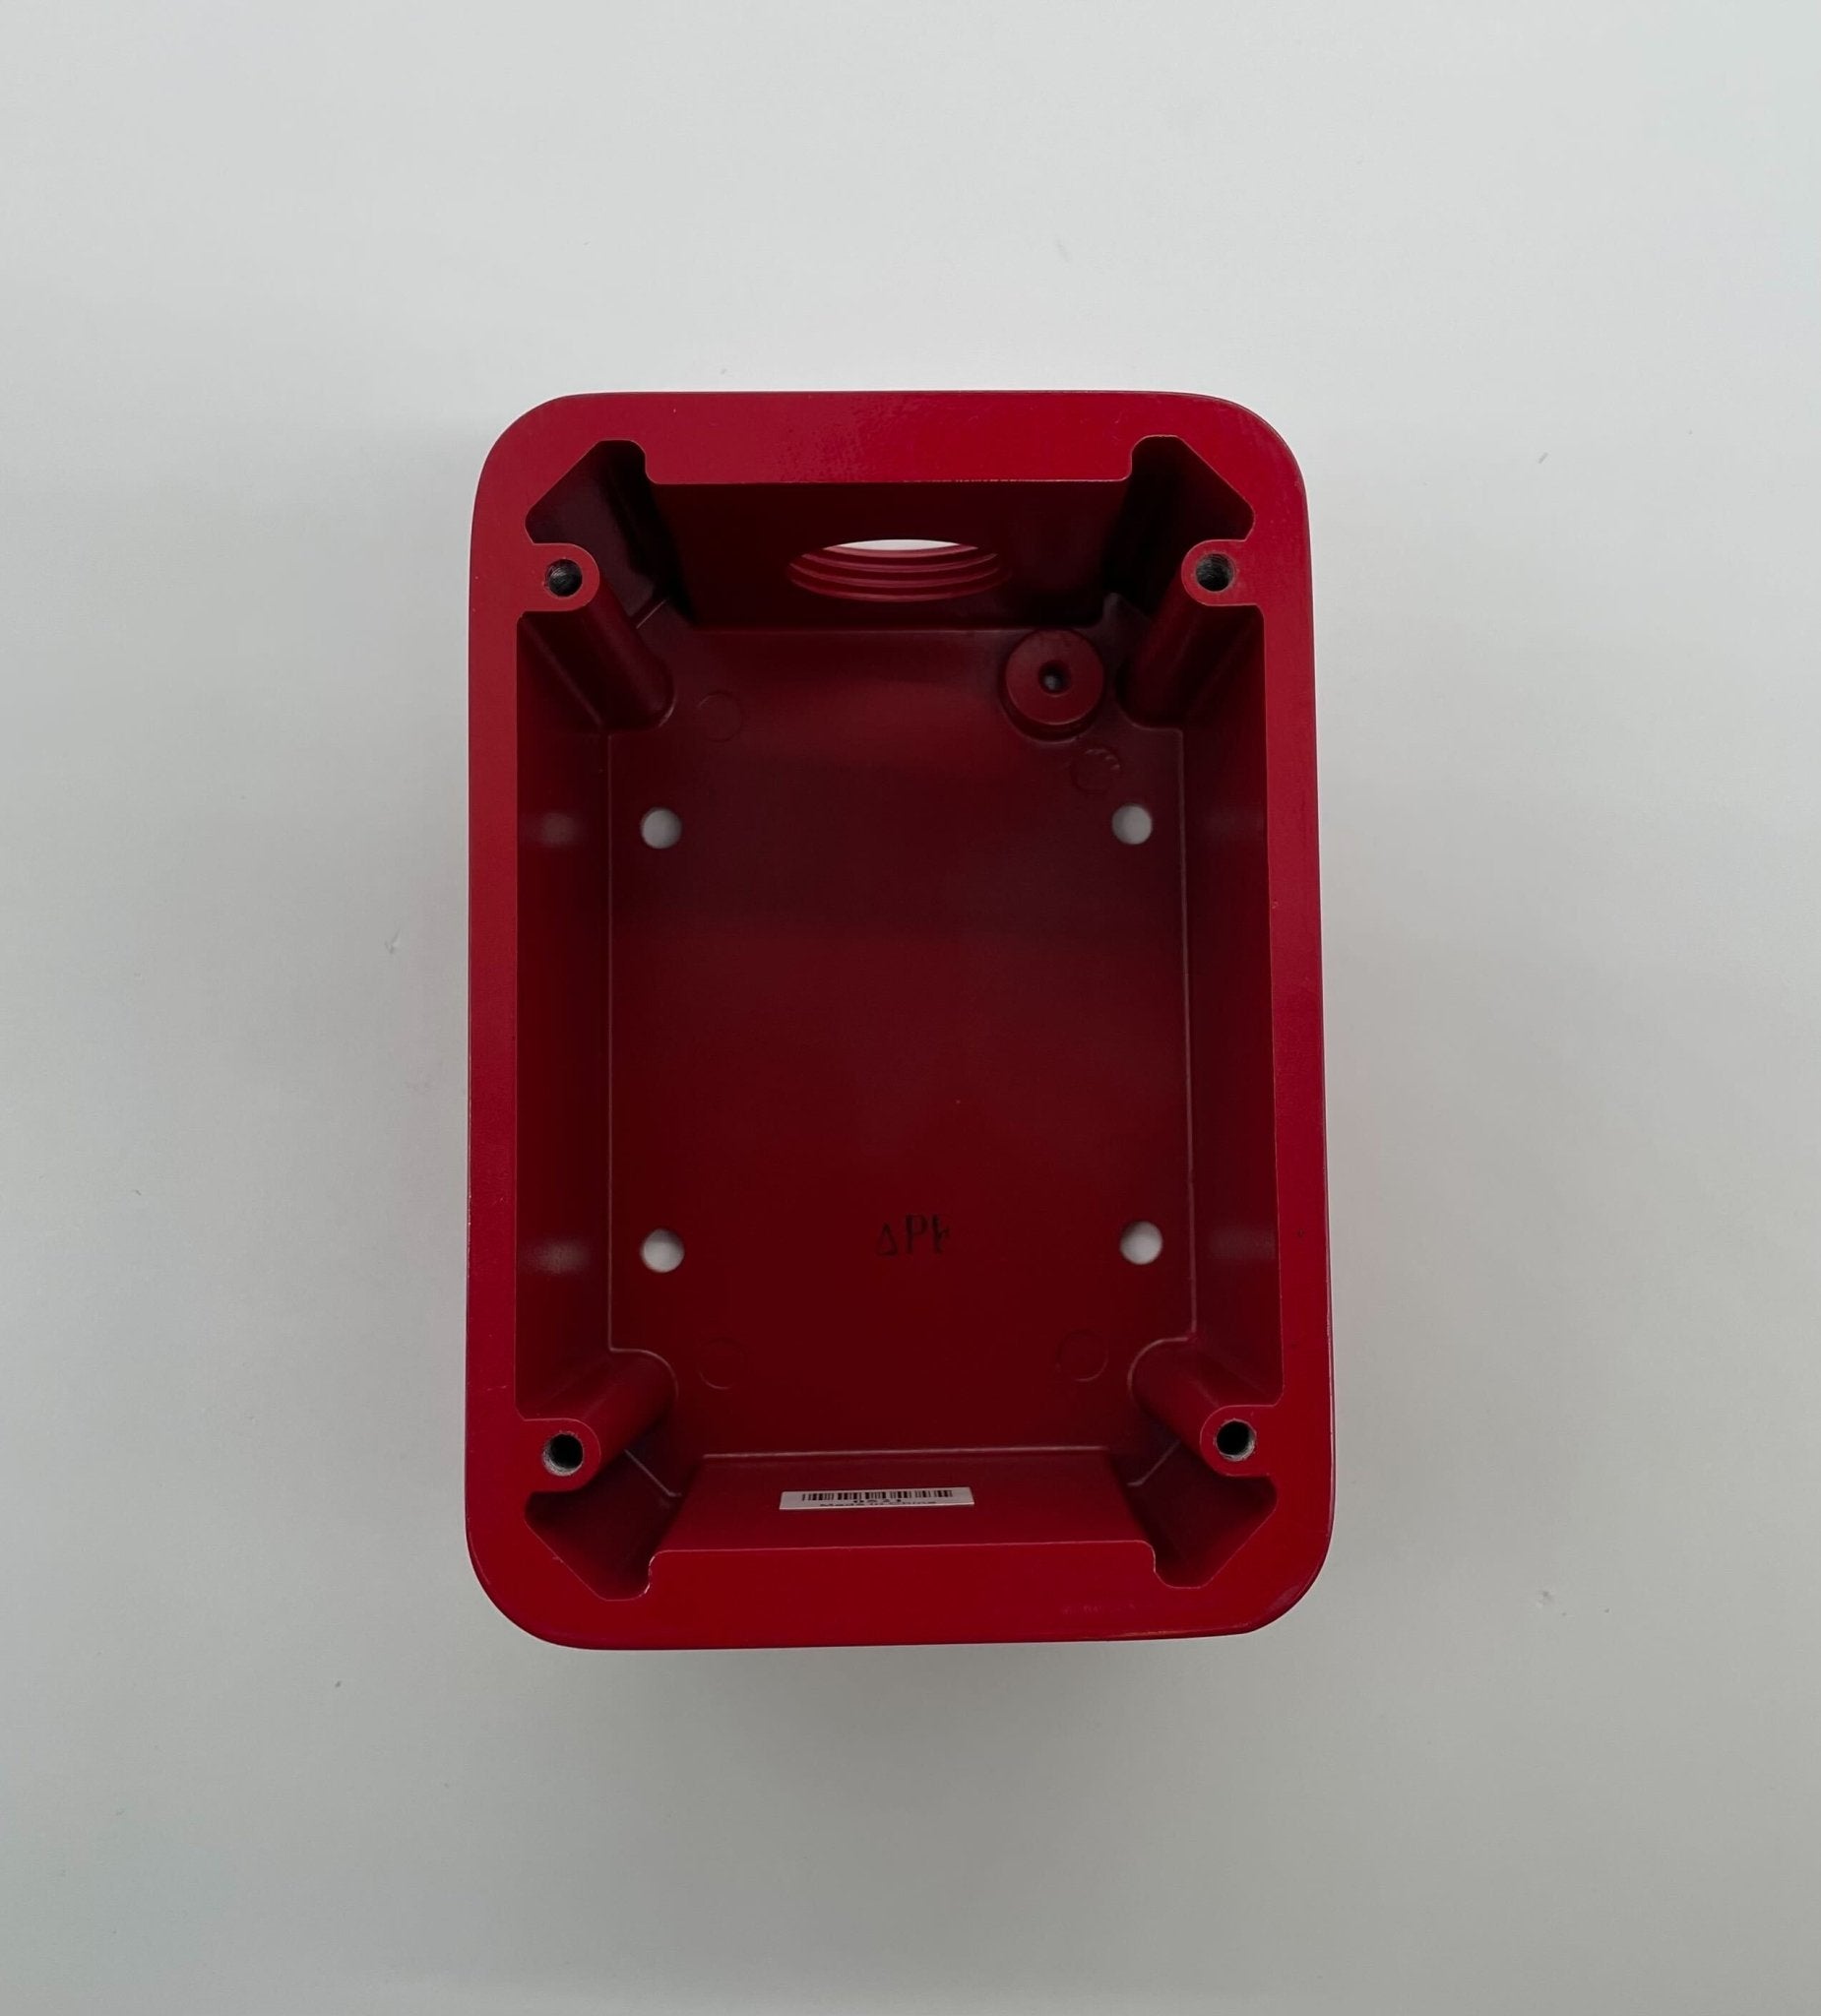 Wheelock MPS-WP - The Fire Alarm Supplier